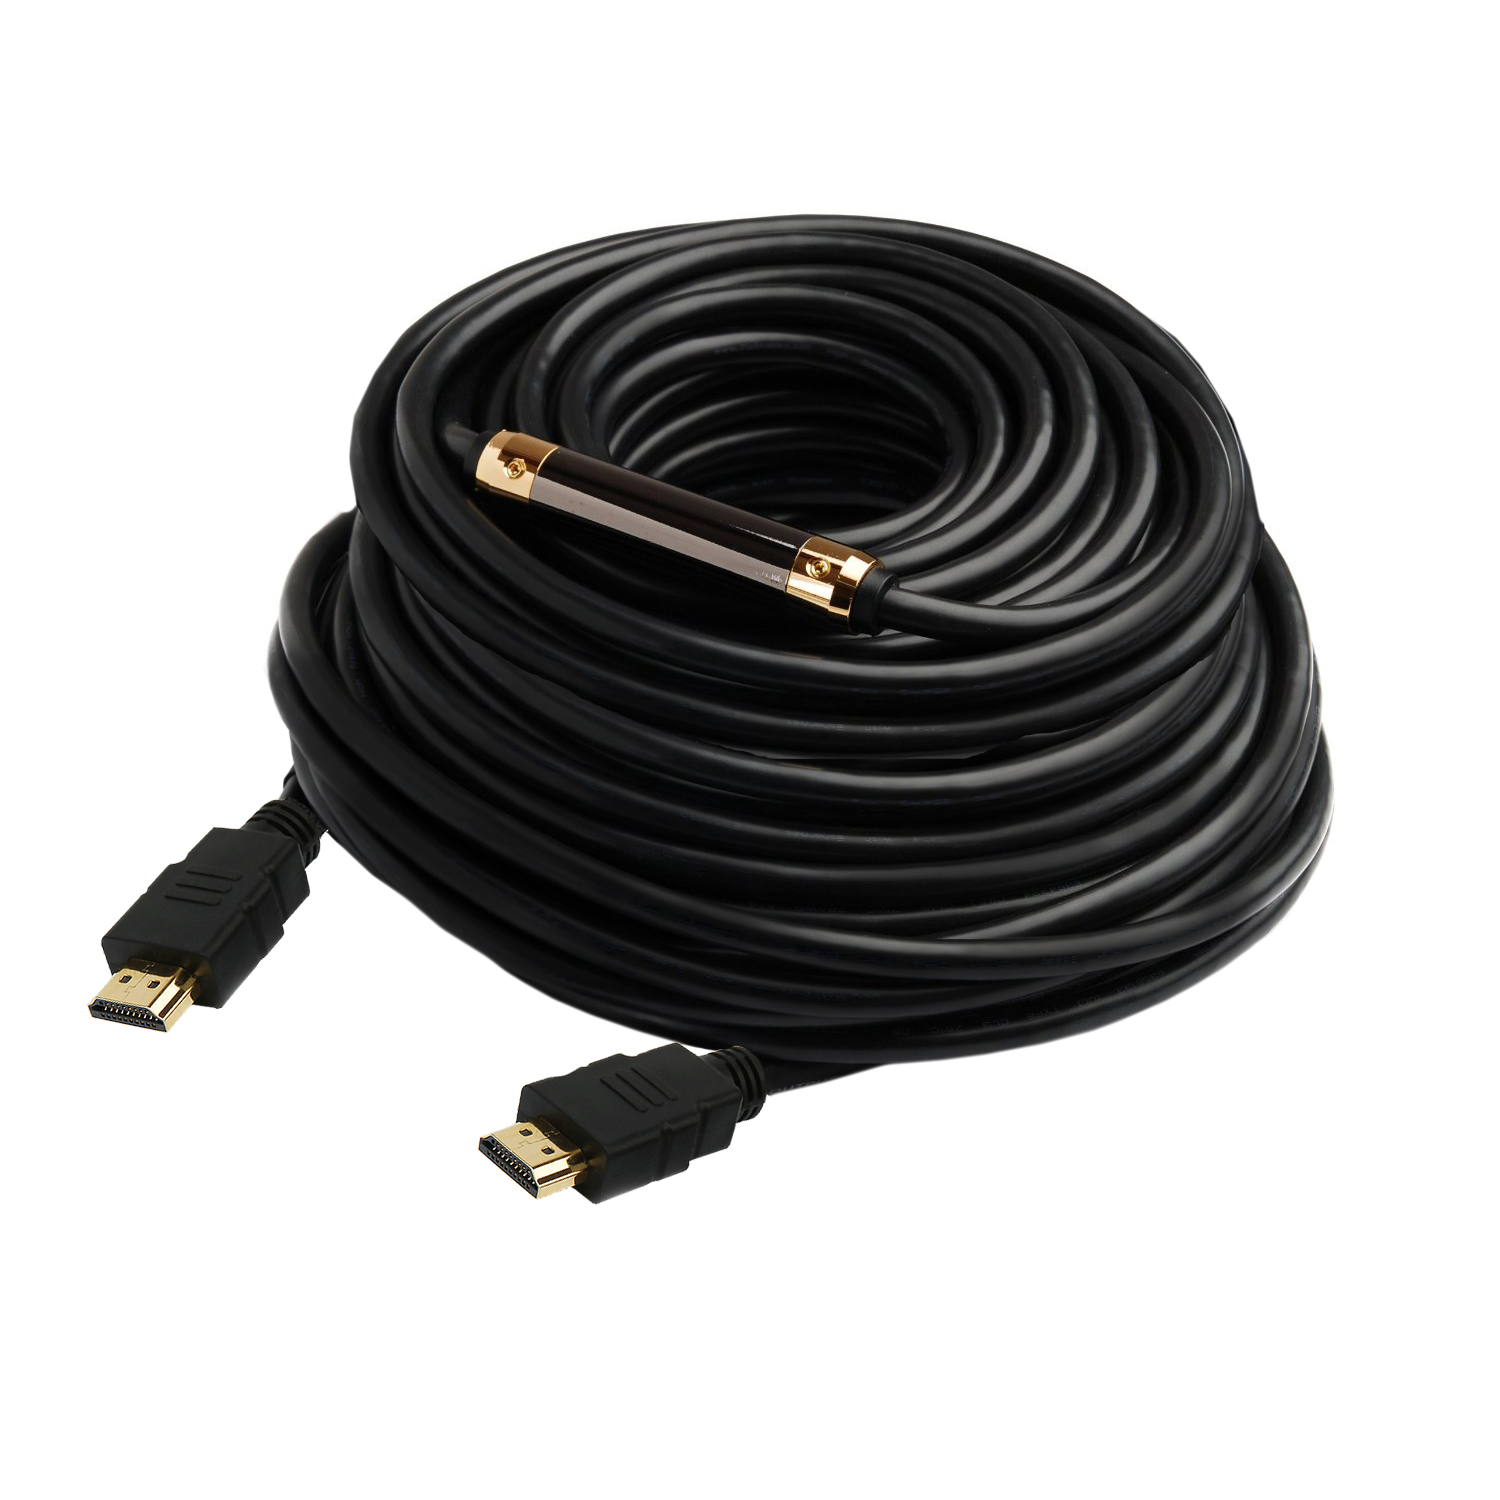 500243BK/150 - High Speed HDMI 2.0 Cable with Chipset, OD 8.0mm 4K/2K at 60Hz - 26 AWG - 150ft